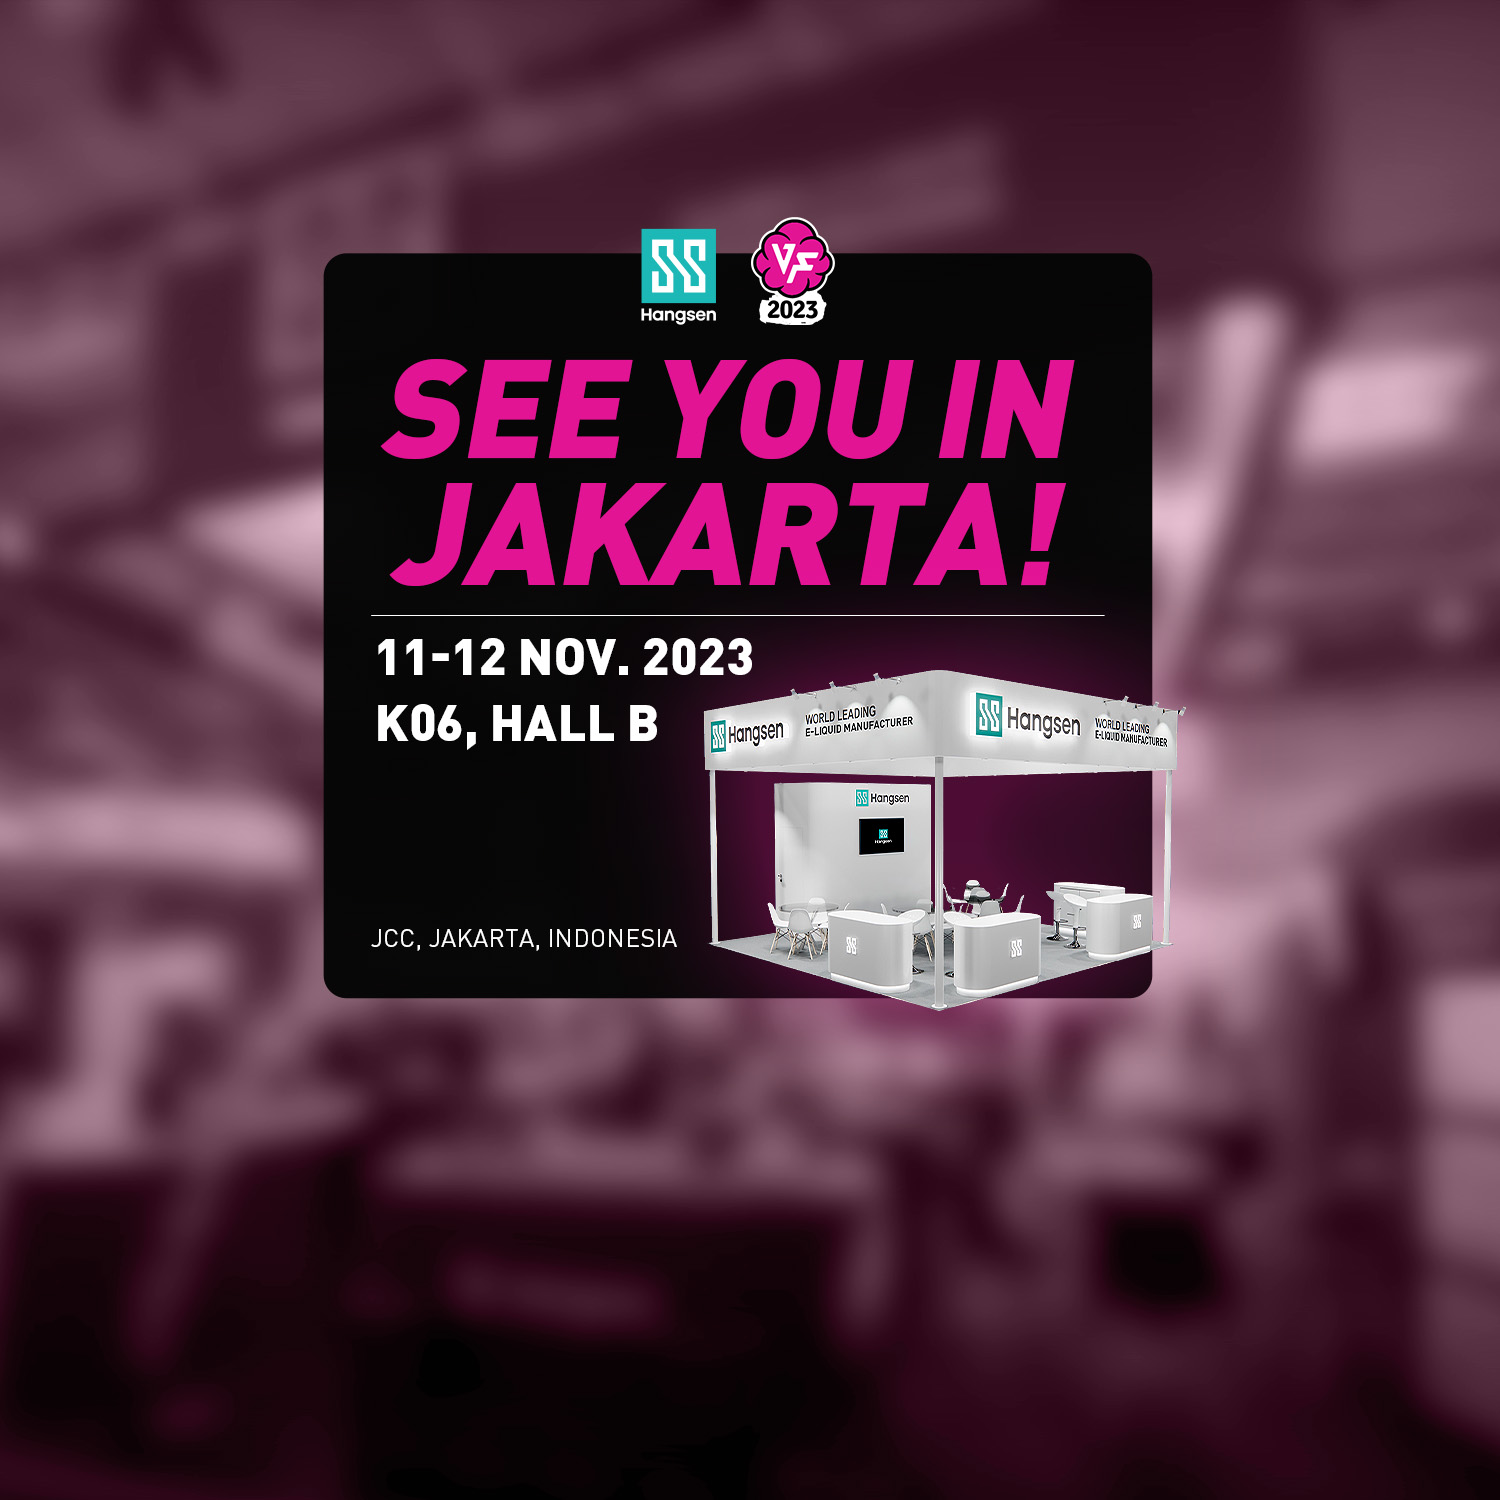 Hangsen has been invited to participate in the Vape Fair 2023 in Jakarta, Indonesia.